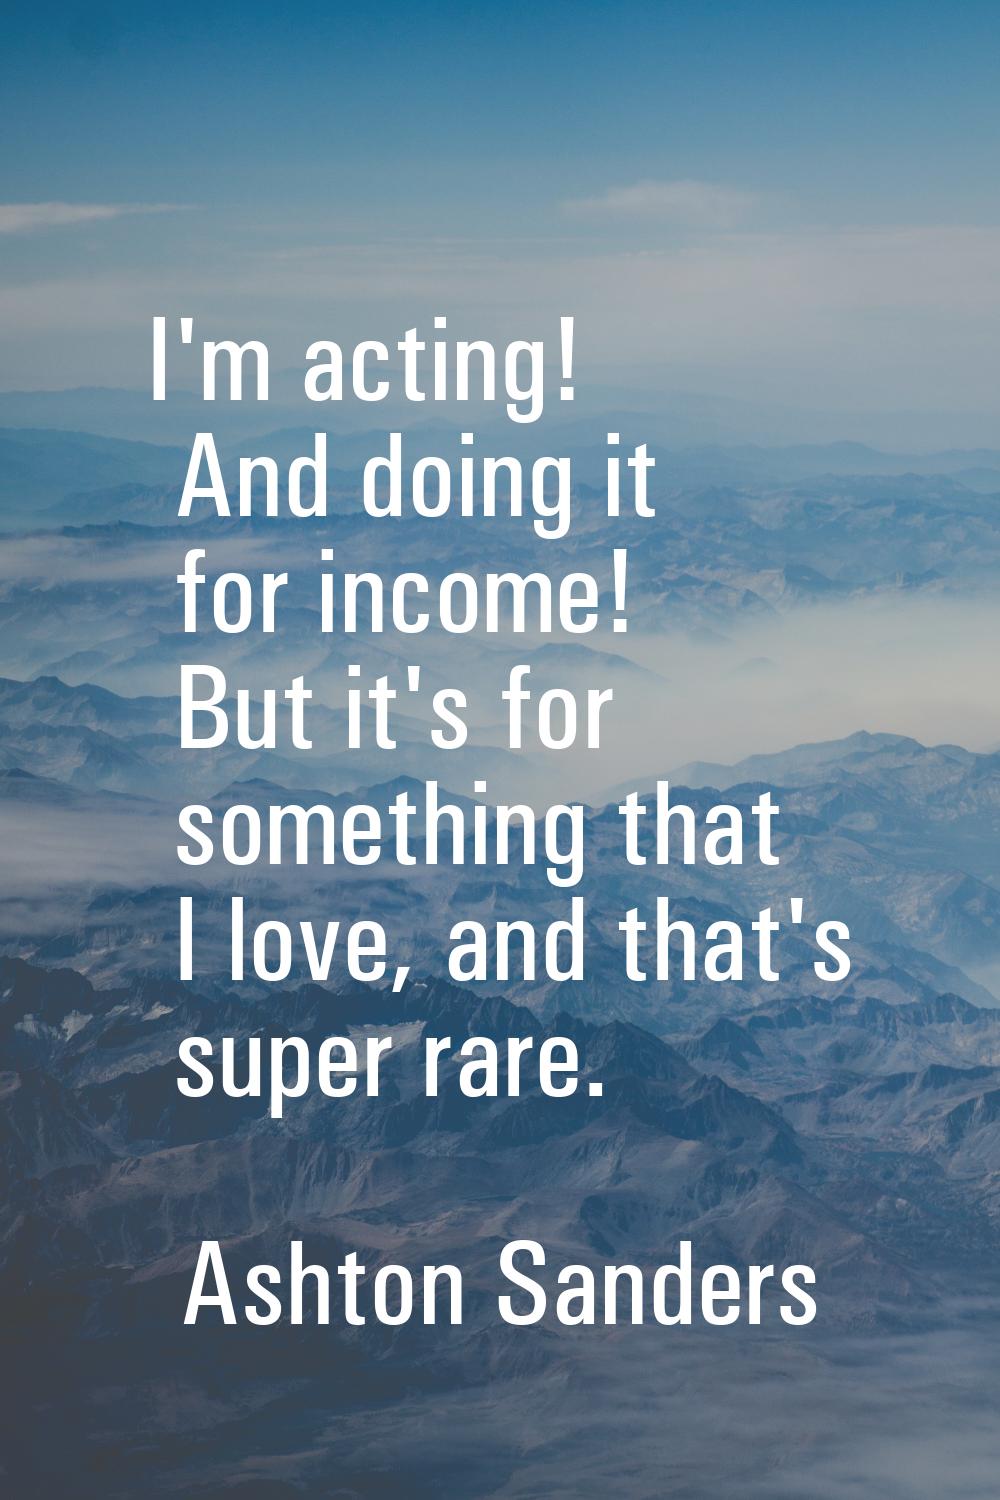 I'm acting! And doing it for income! But it's for something that I love, and that's super rare.